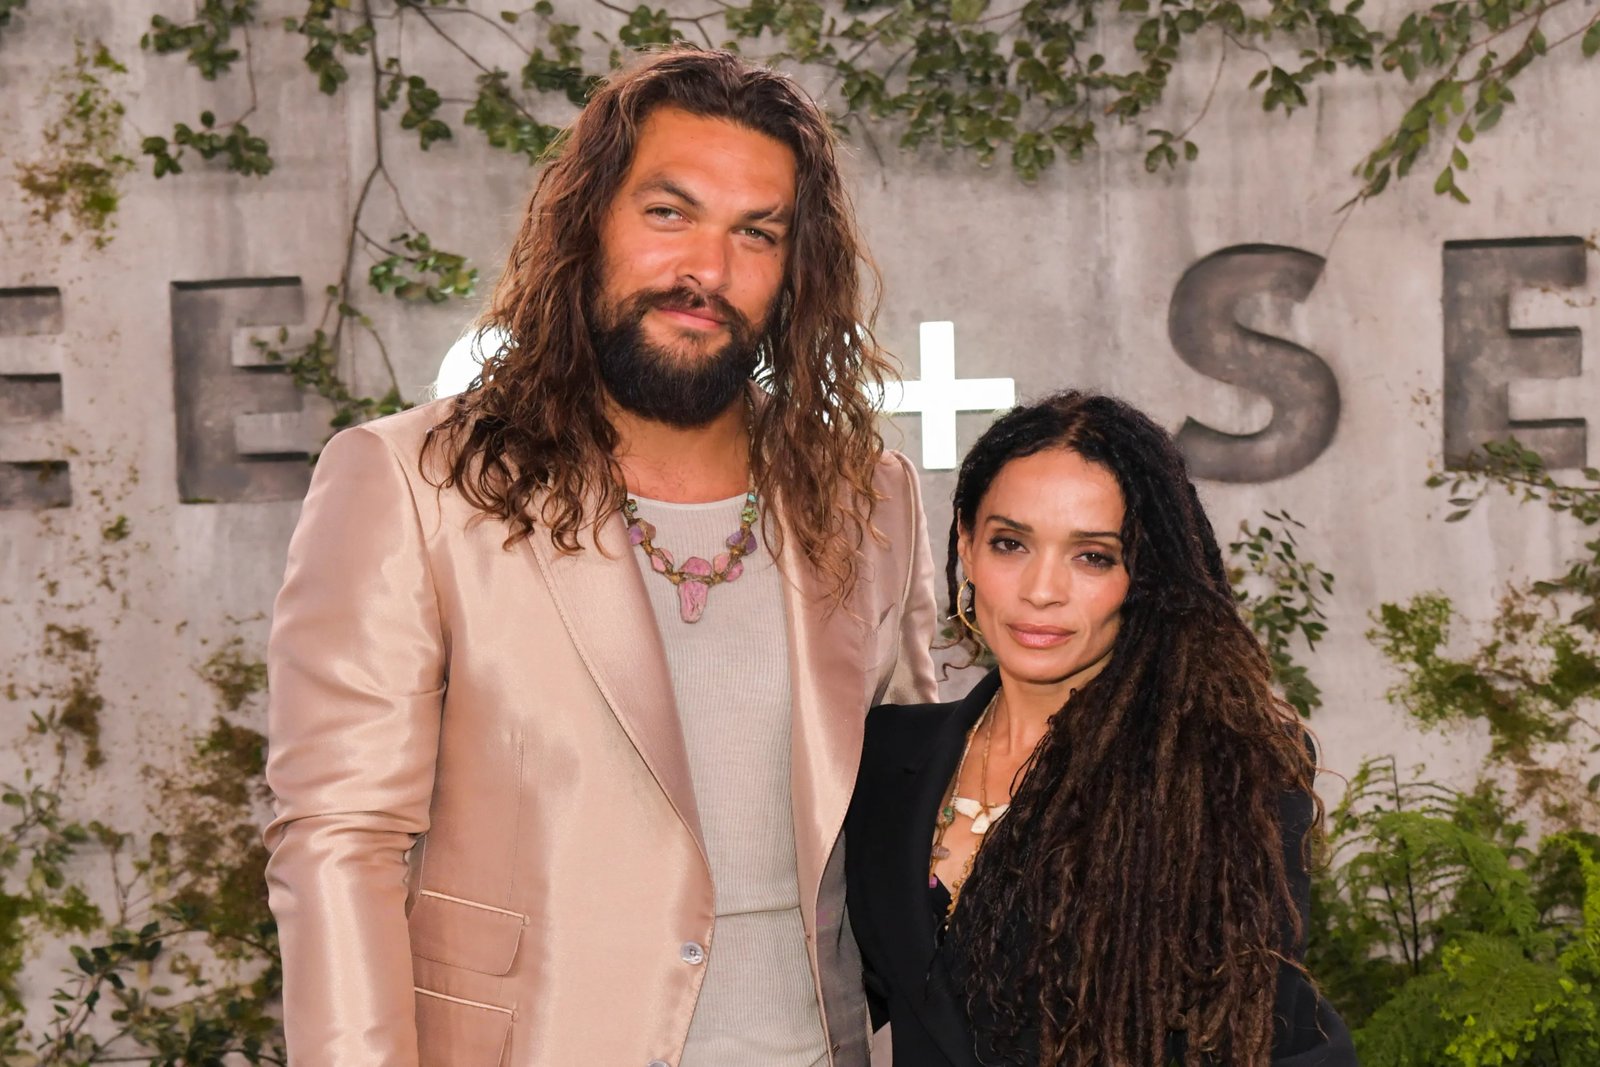 In the Latest News Lisa Bonet and Jason Momoa have officially filed for divorce after two years of announcing their breakup.